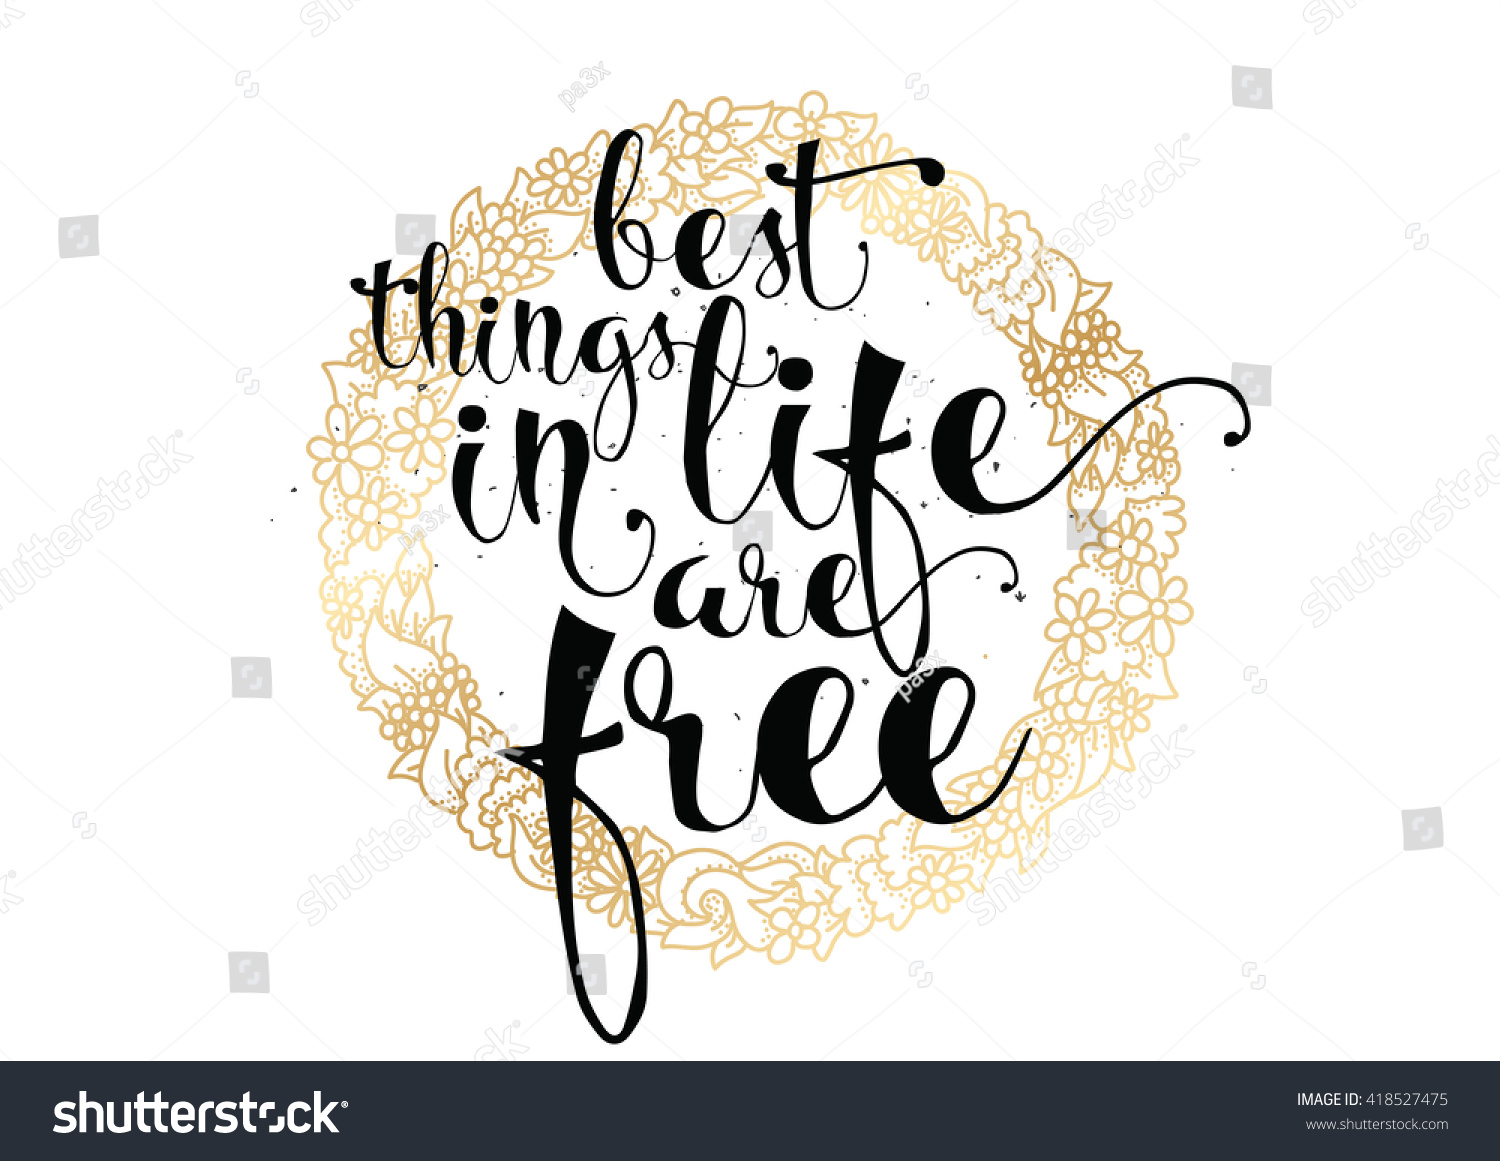 Best things in life are free Greeting card with calligraphy Hand drawn lettering